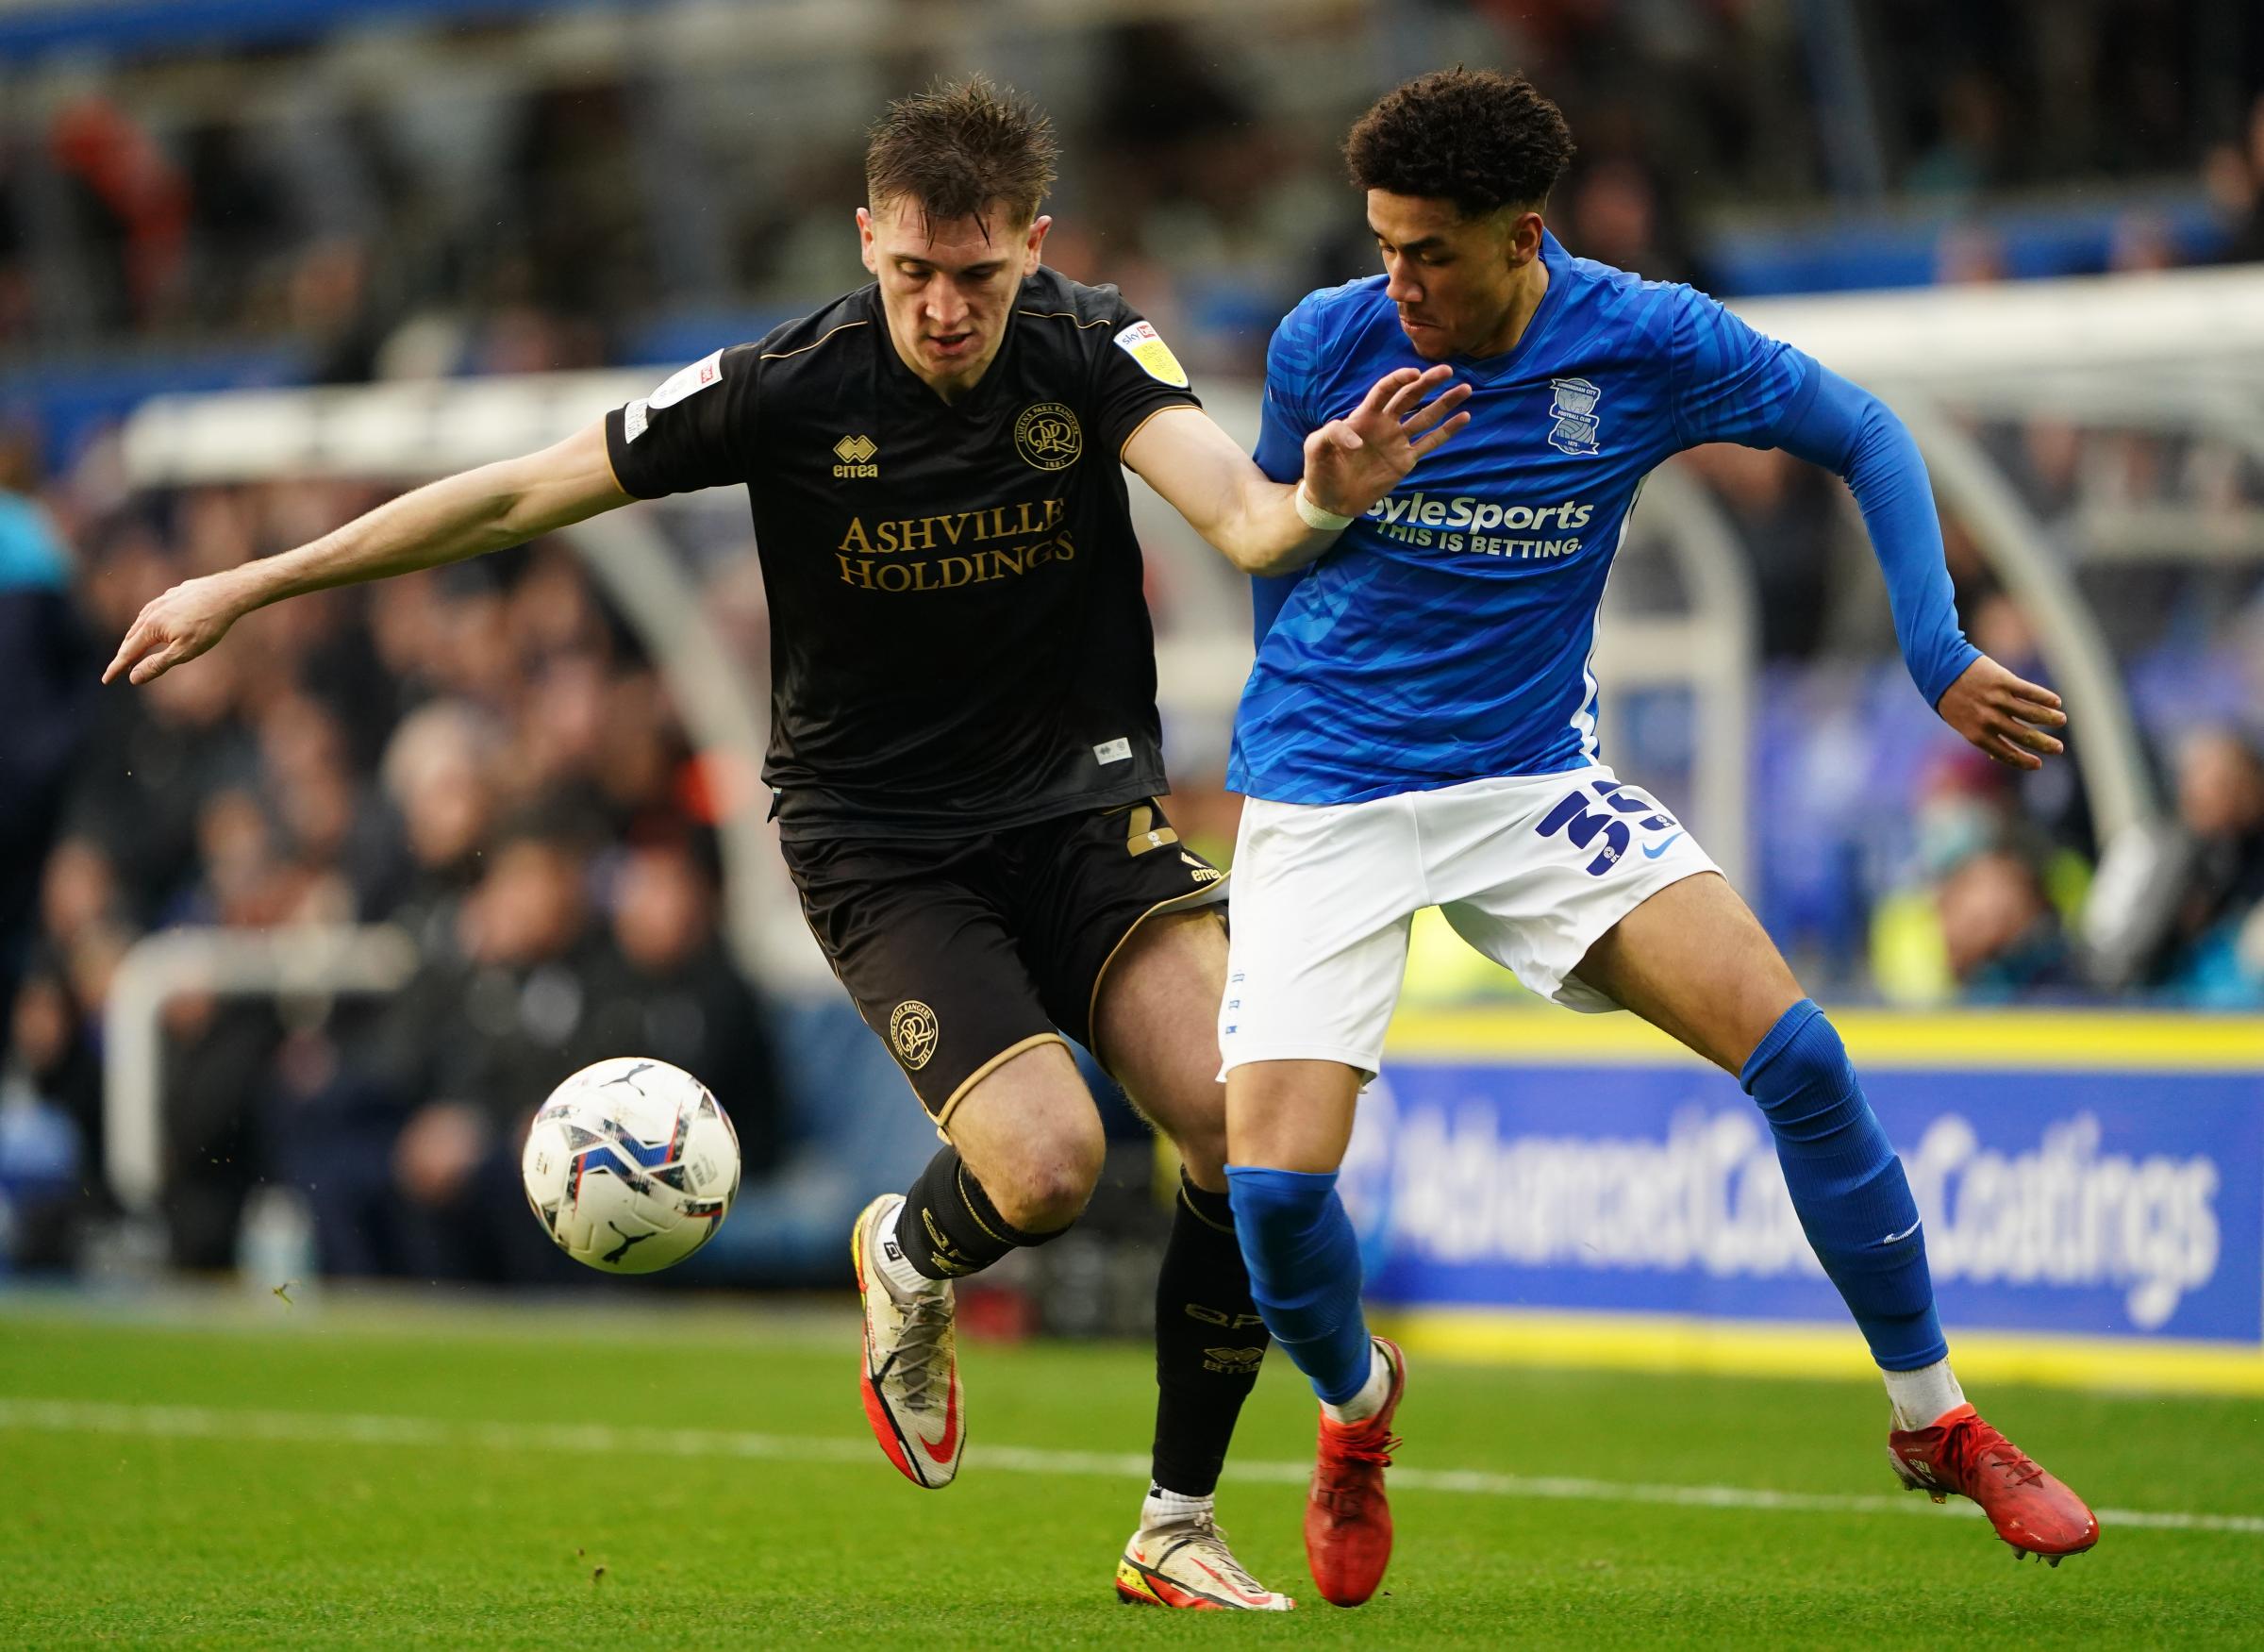 Championship starlet reportedly 'attracting interest' from Southampton and Leeds